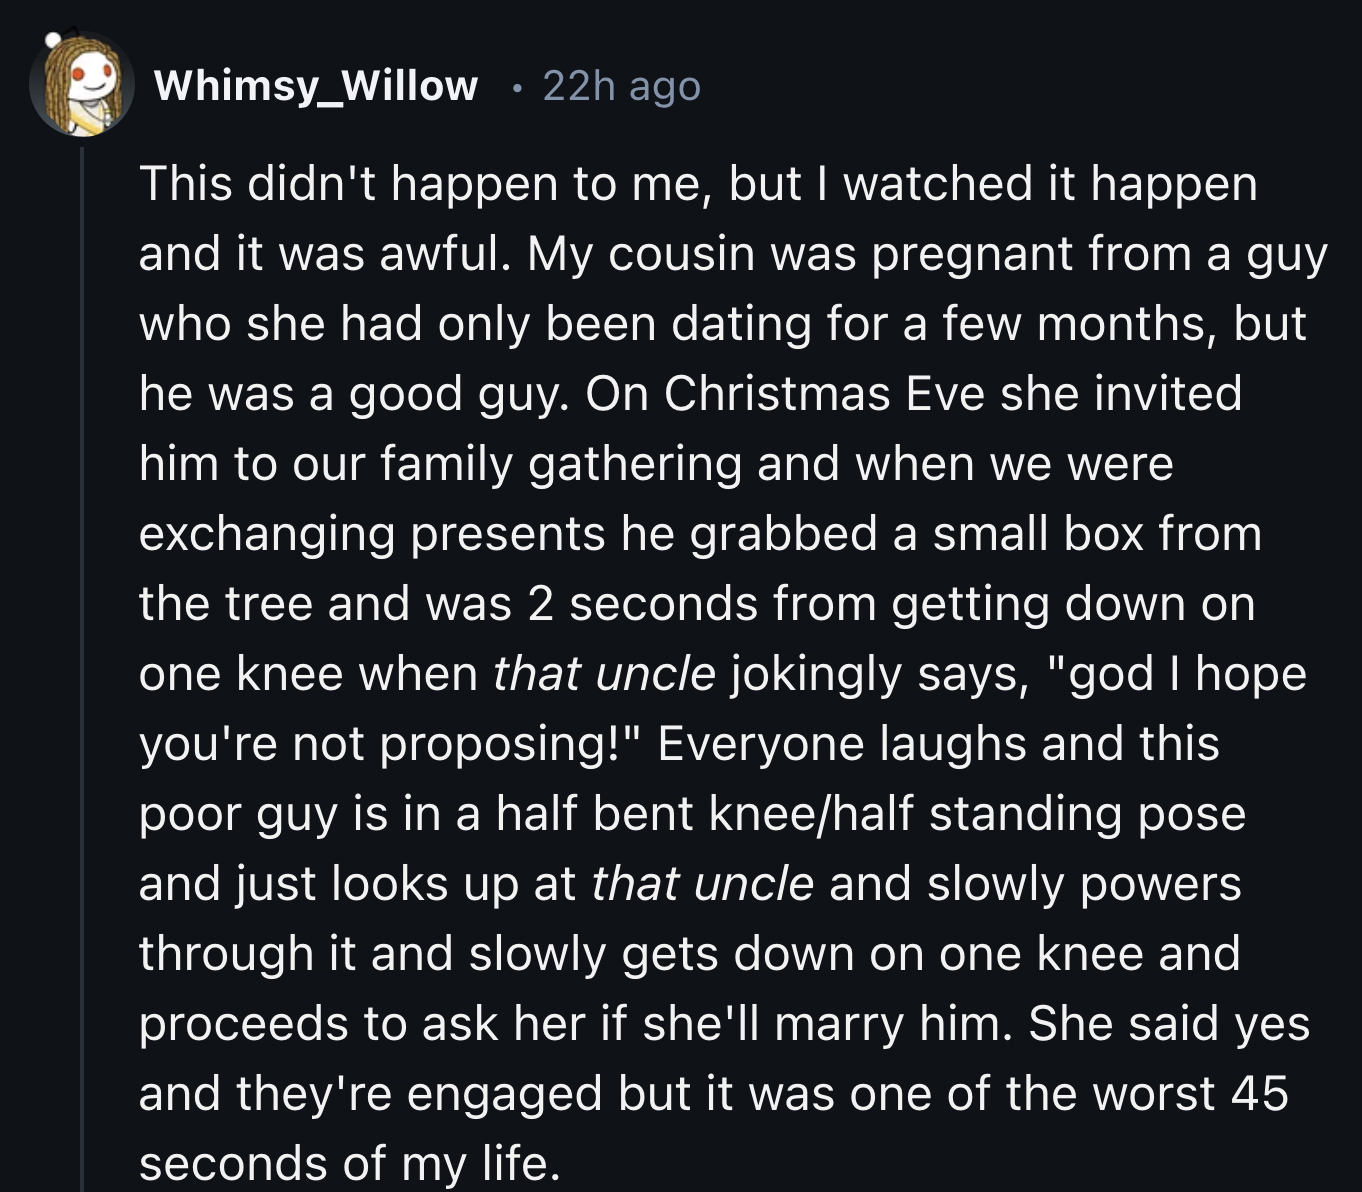 screenshot - Whimsy_Willow 22h ago This didn't happen to me, but I watched it happen and it was awful. My cousin was pregnant from a guy who she had only been dating for a few months, but he was a good guy. On Christmas Eve she invited him to our family g